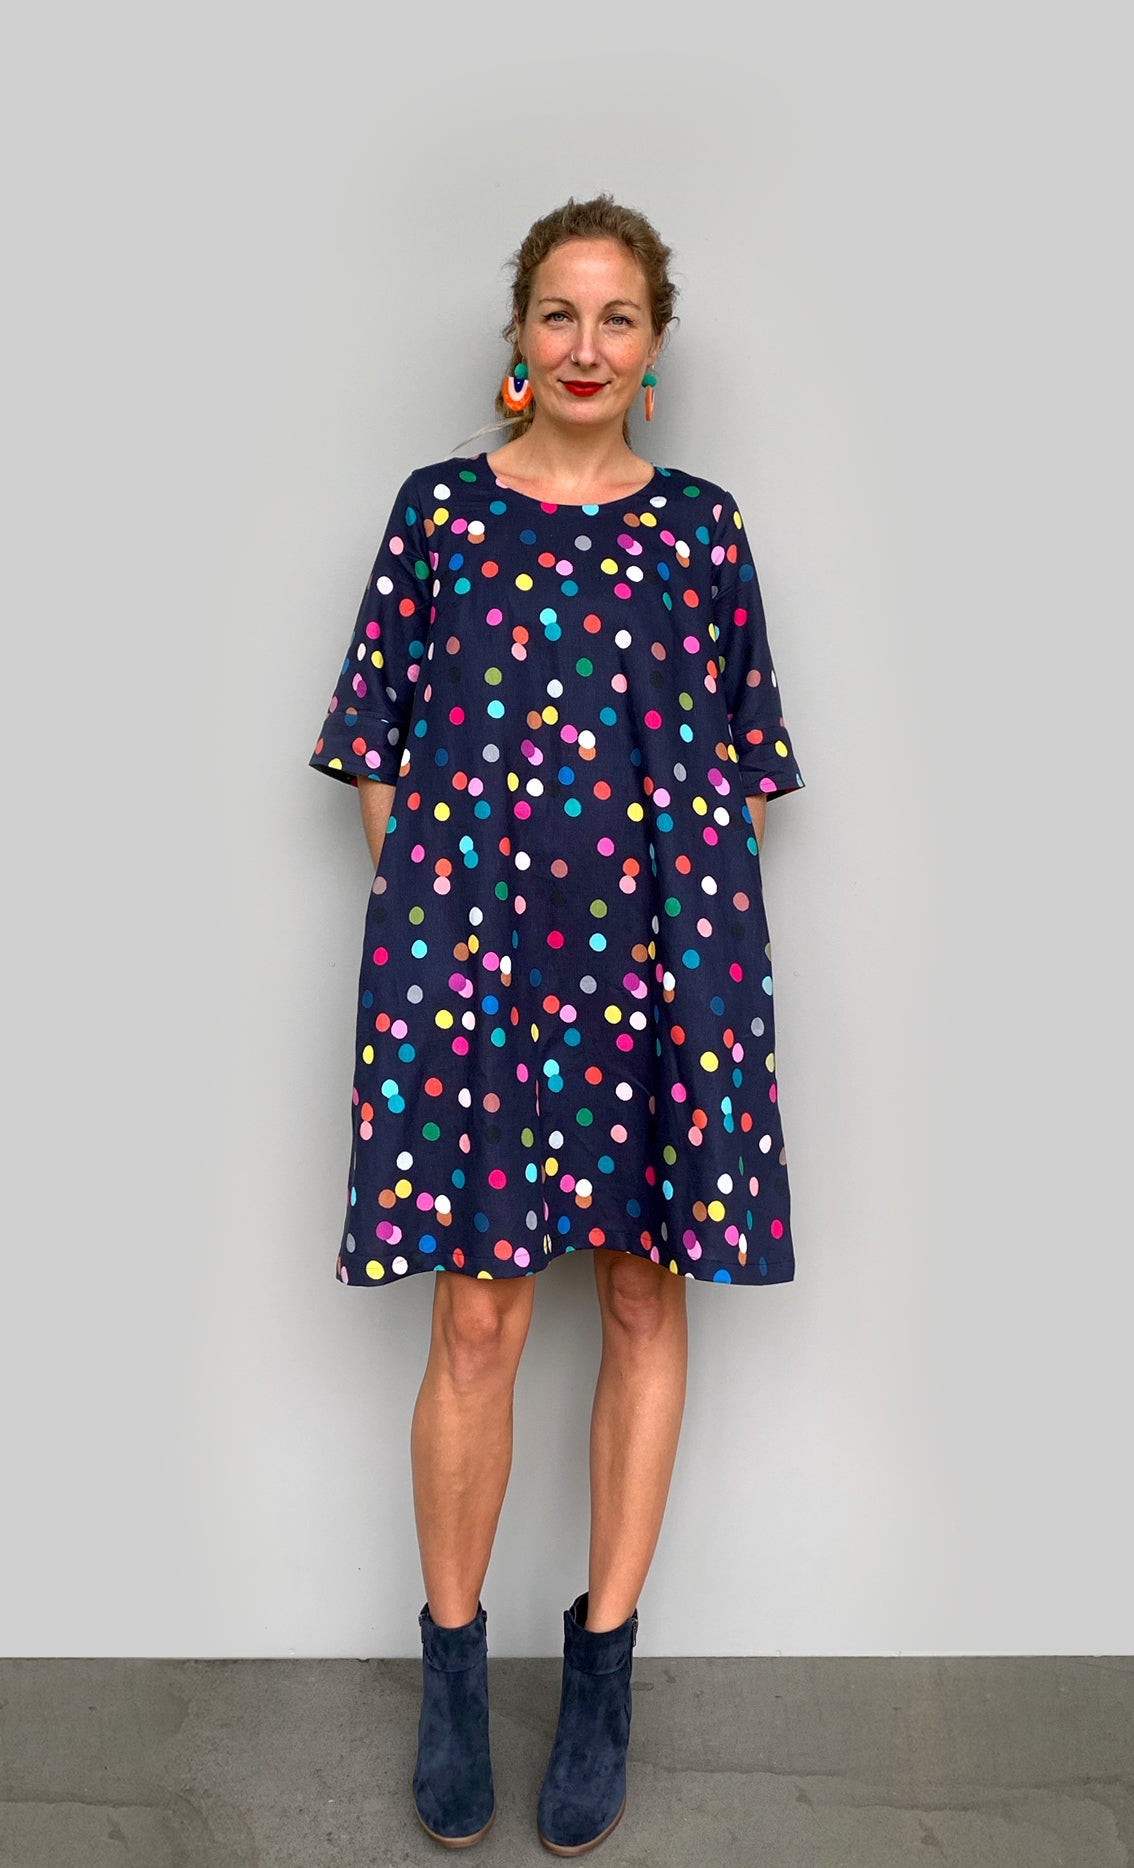 Confetti linen dress with tie (navy)ONLY ONE TEAL LEFT. (2110849712224)